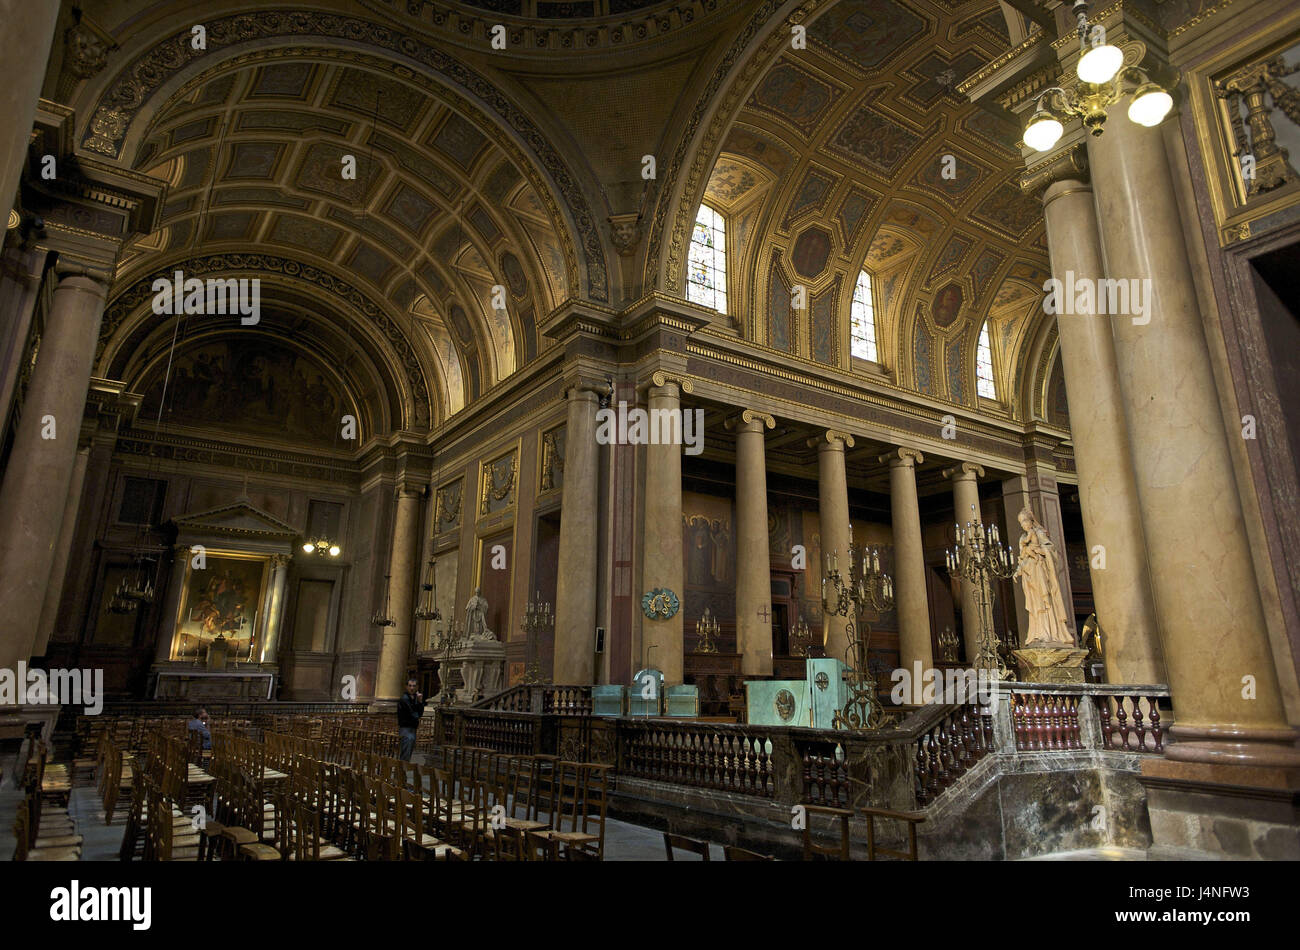 France, Brittany, Rennes, St-Pierre Kathedrale, interior shot, Stock Photo